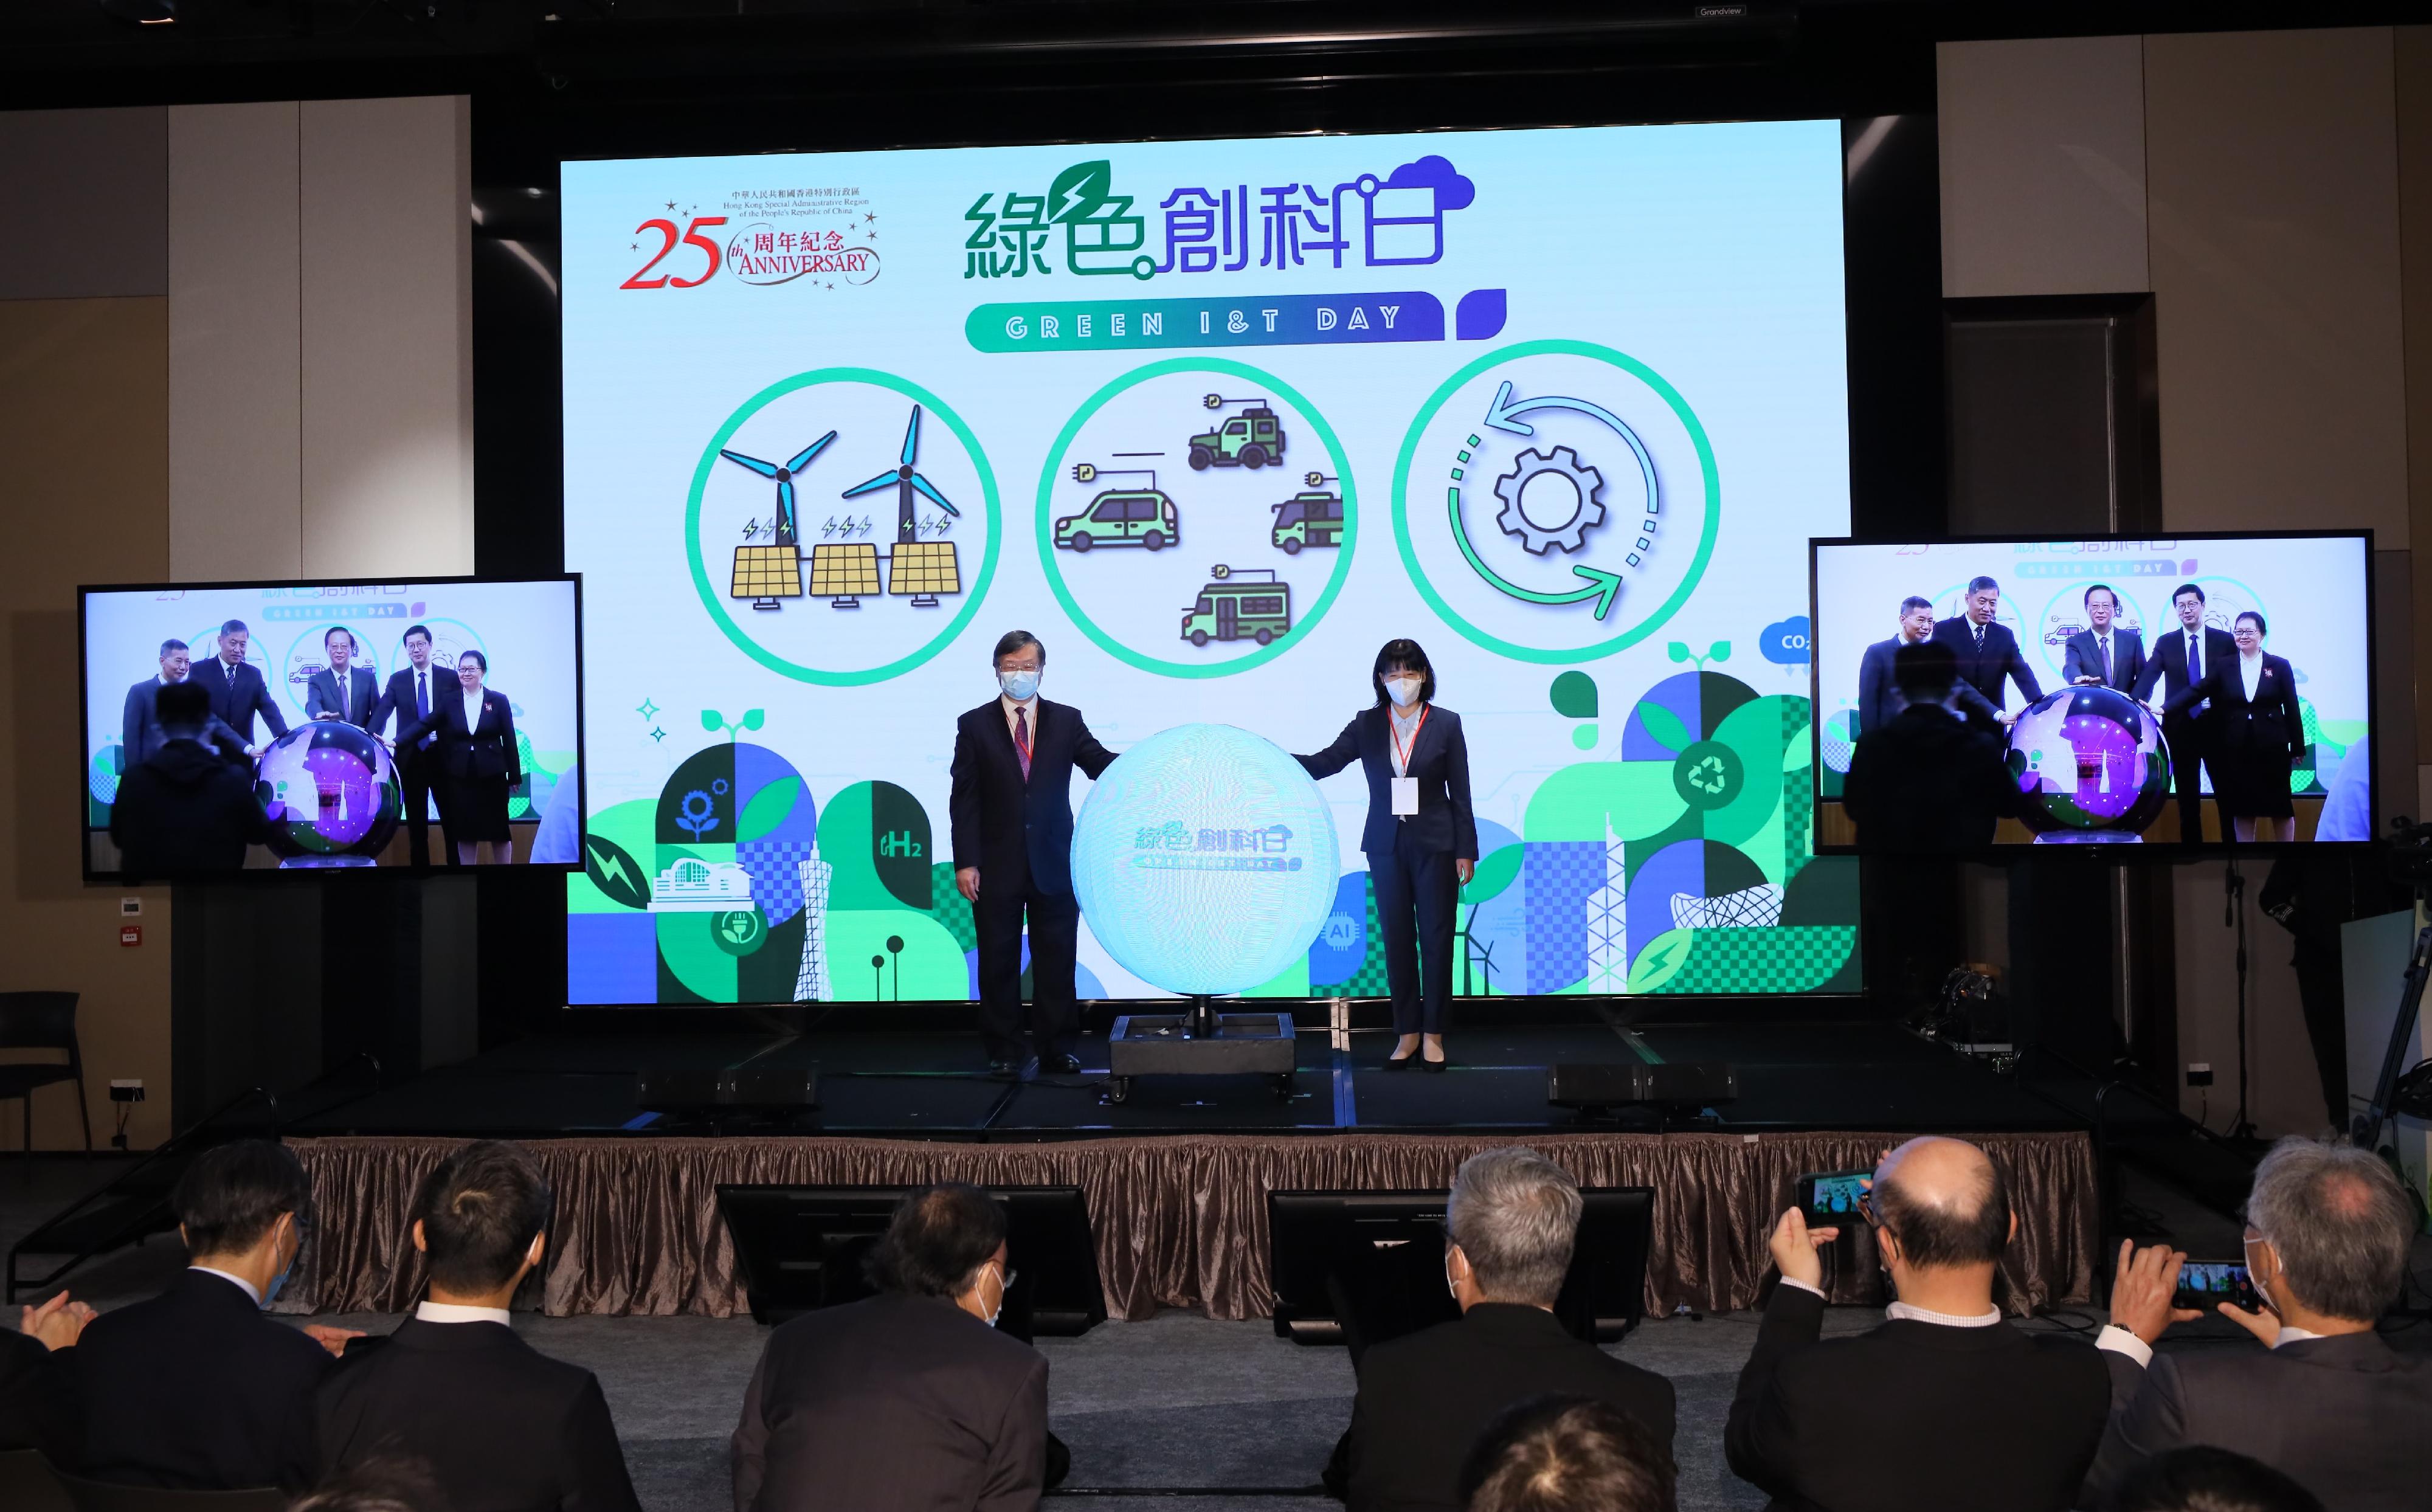 The Environment and Ecology Bureau, the Electrical and Mechanical Services Department and the Guangdong Provincial Association for Science and Technology jointly hosted the third Green I&T Day today (November 3). Photo shows the Director of Electrical and Mechanical Services, Mr Eric Pang (left), and the Director, Department of Educational, Scientific and Technological Affairs of the Liaison Office of the Central People's Government in the Hong Kong Special Administrative Region, Ms Guo Jianhua (right), officiating at the kick-off ceremony of Green I&T Day with other guests via video-conferencing.